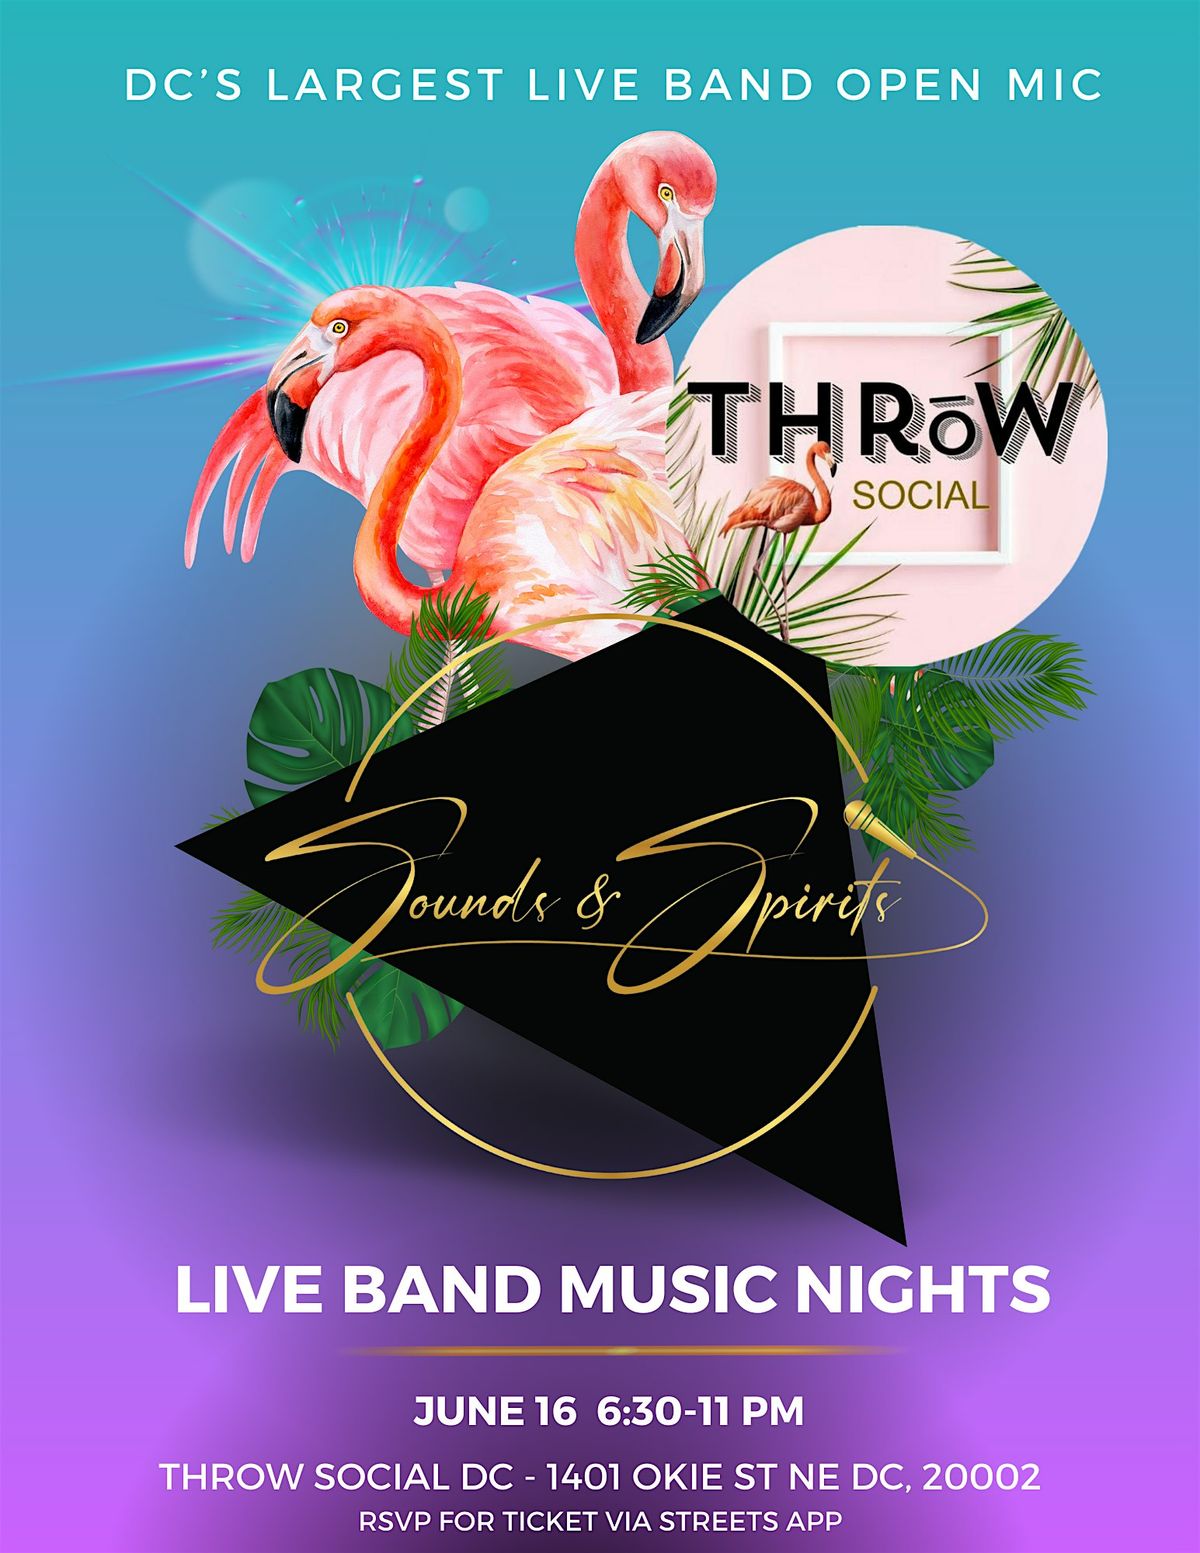 Sounds & Spirits June - DC's Largest Live Band Open Mic